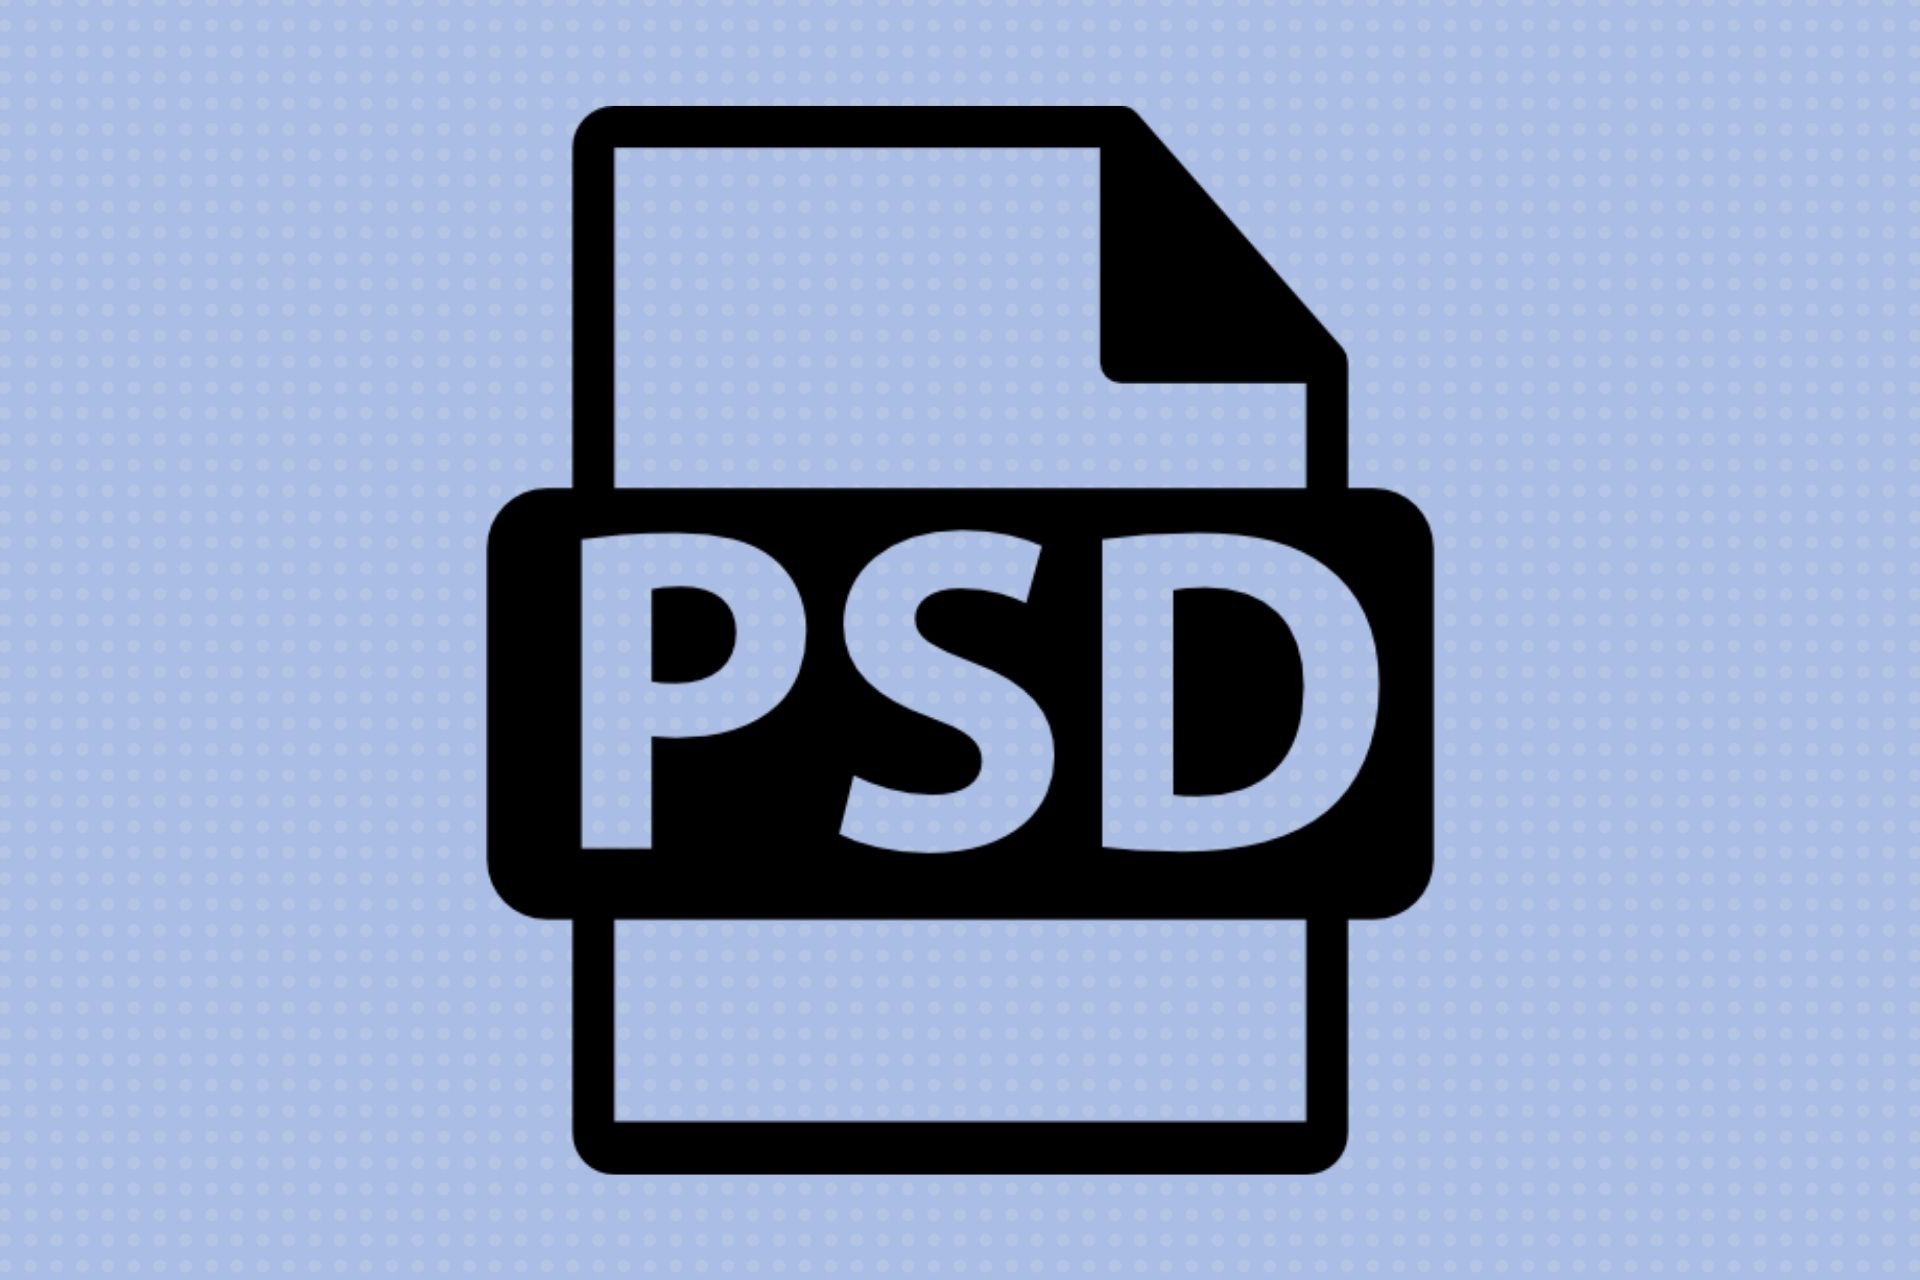 How can I open PSD files